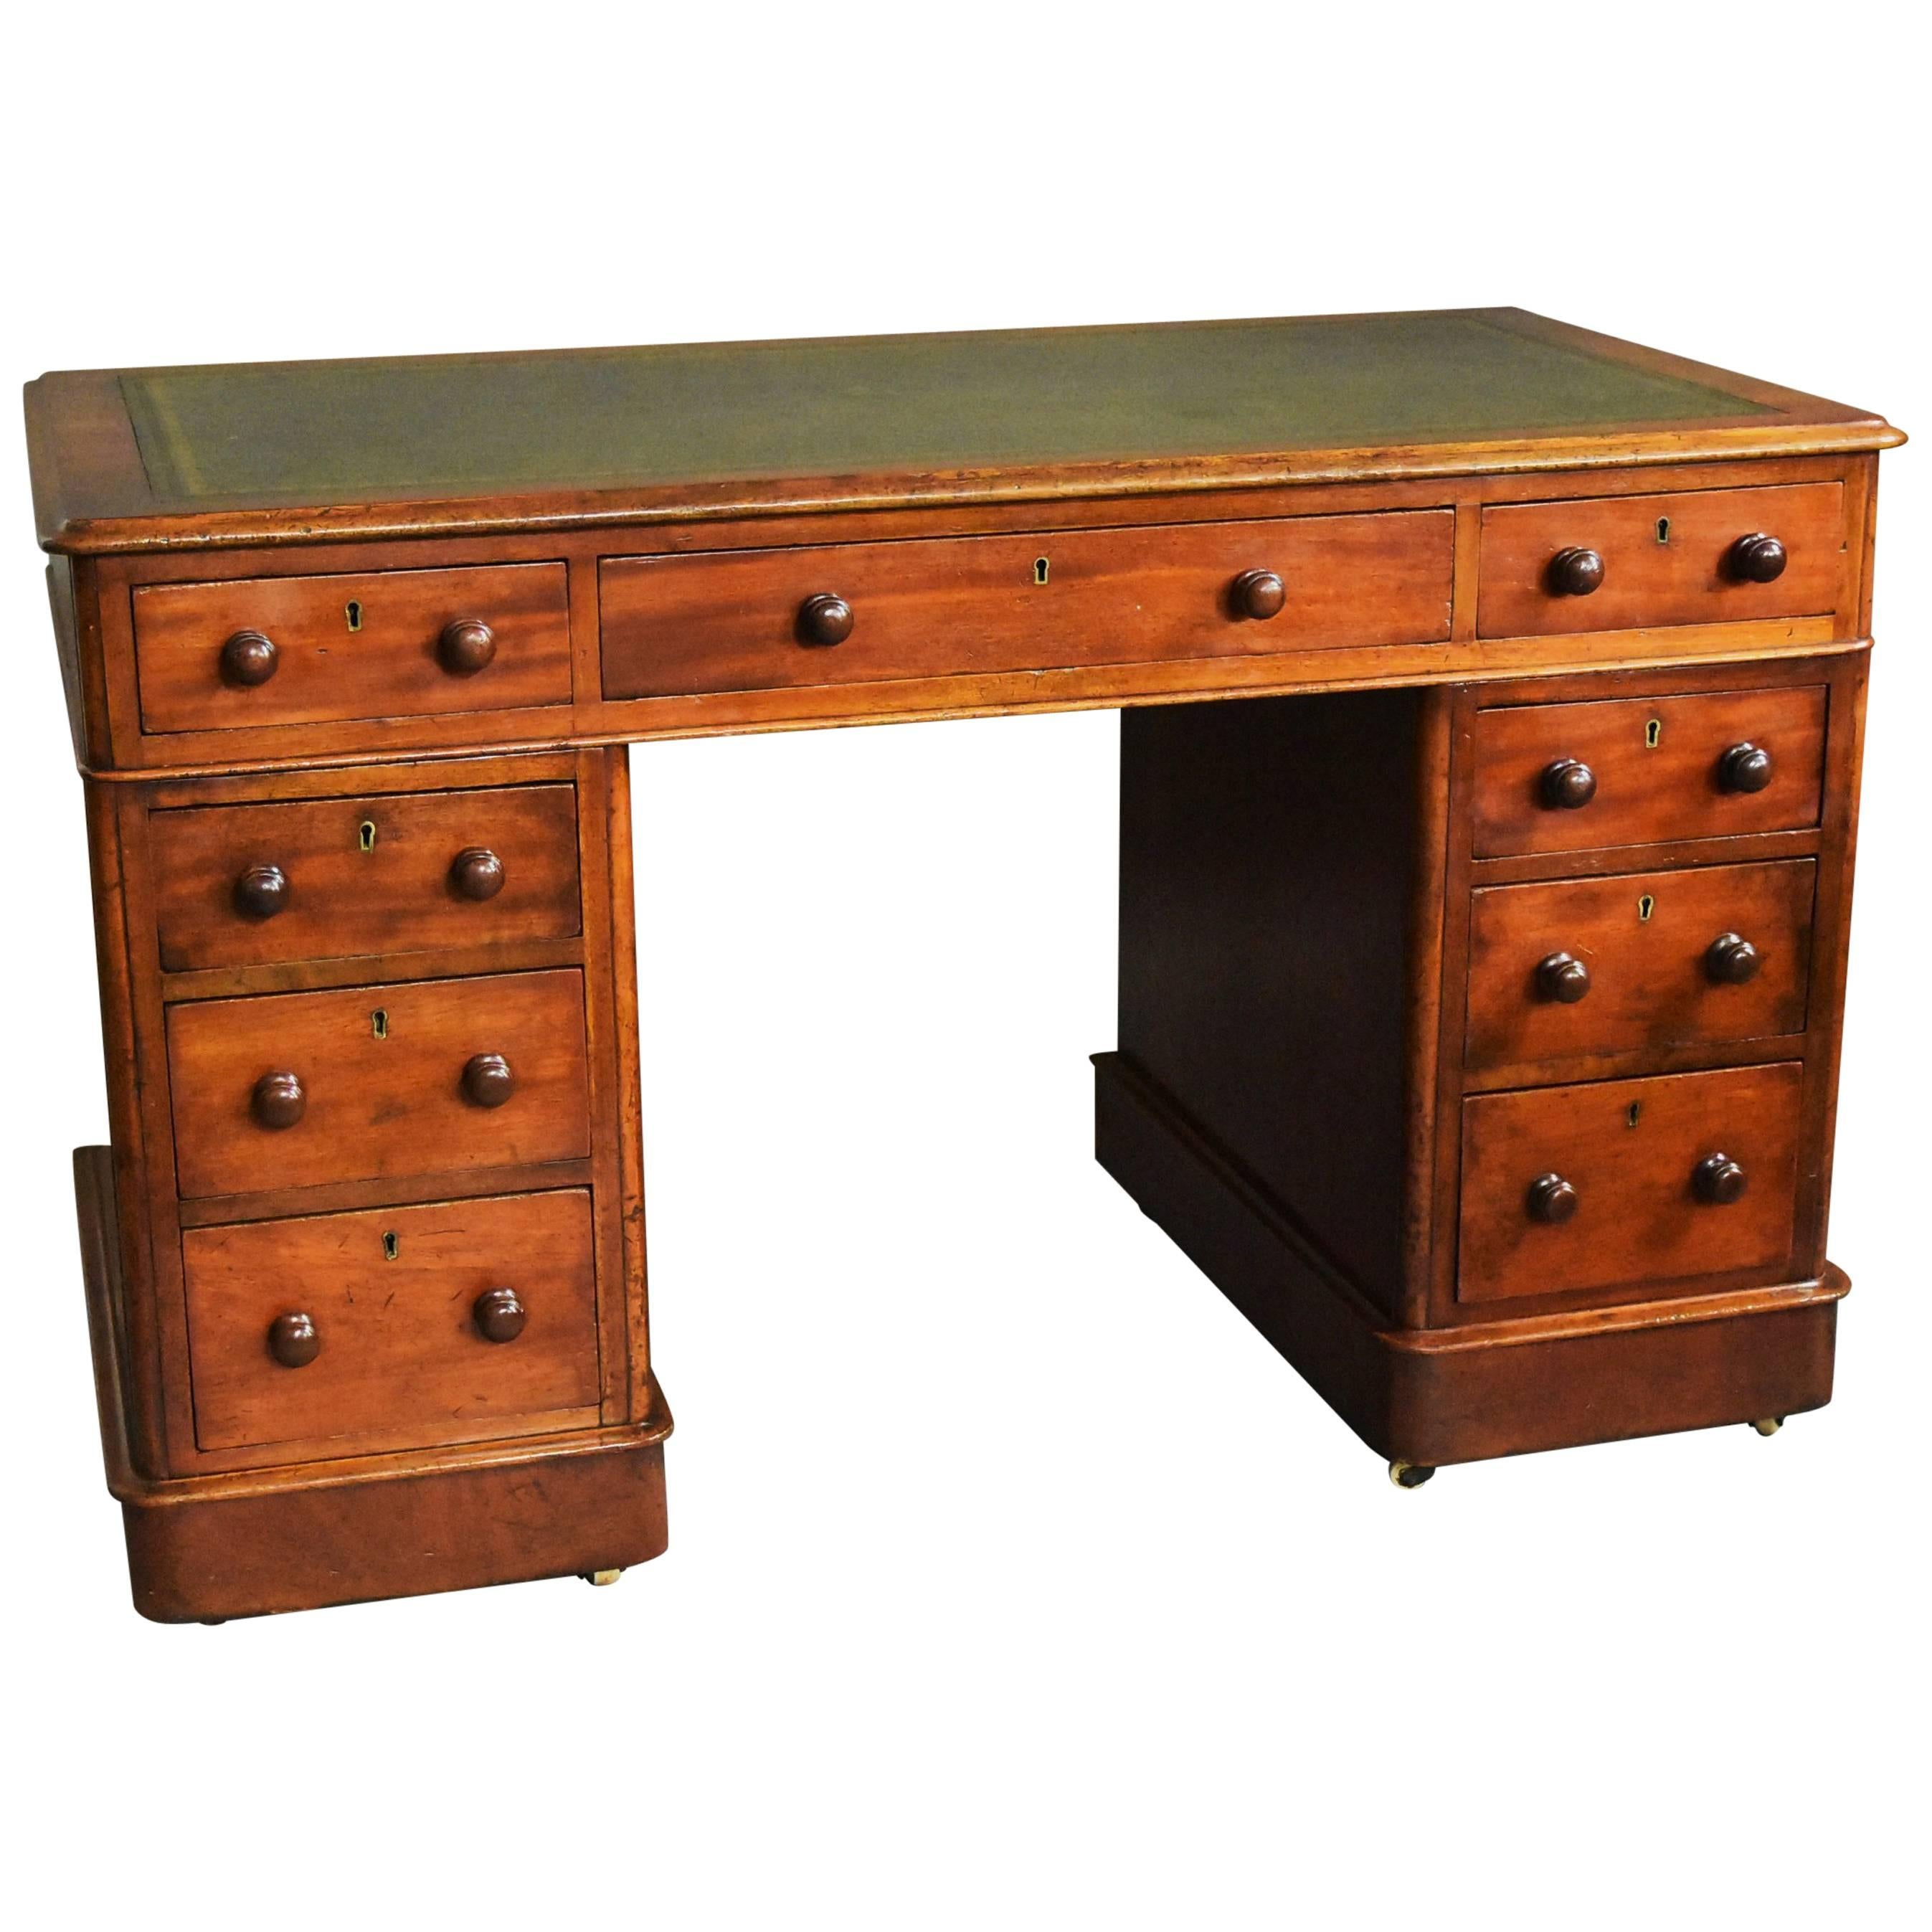 Late 19th Century Mahogany Pedestal Desk of Small Proportions